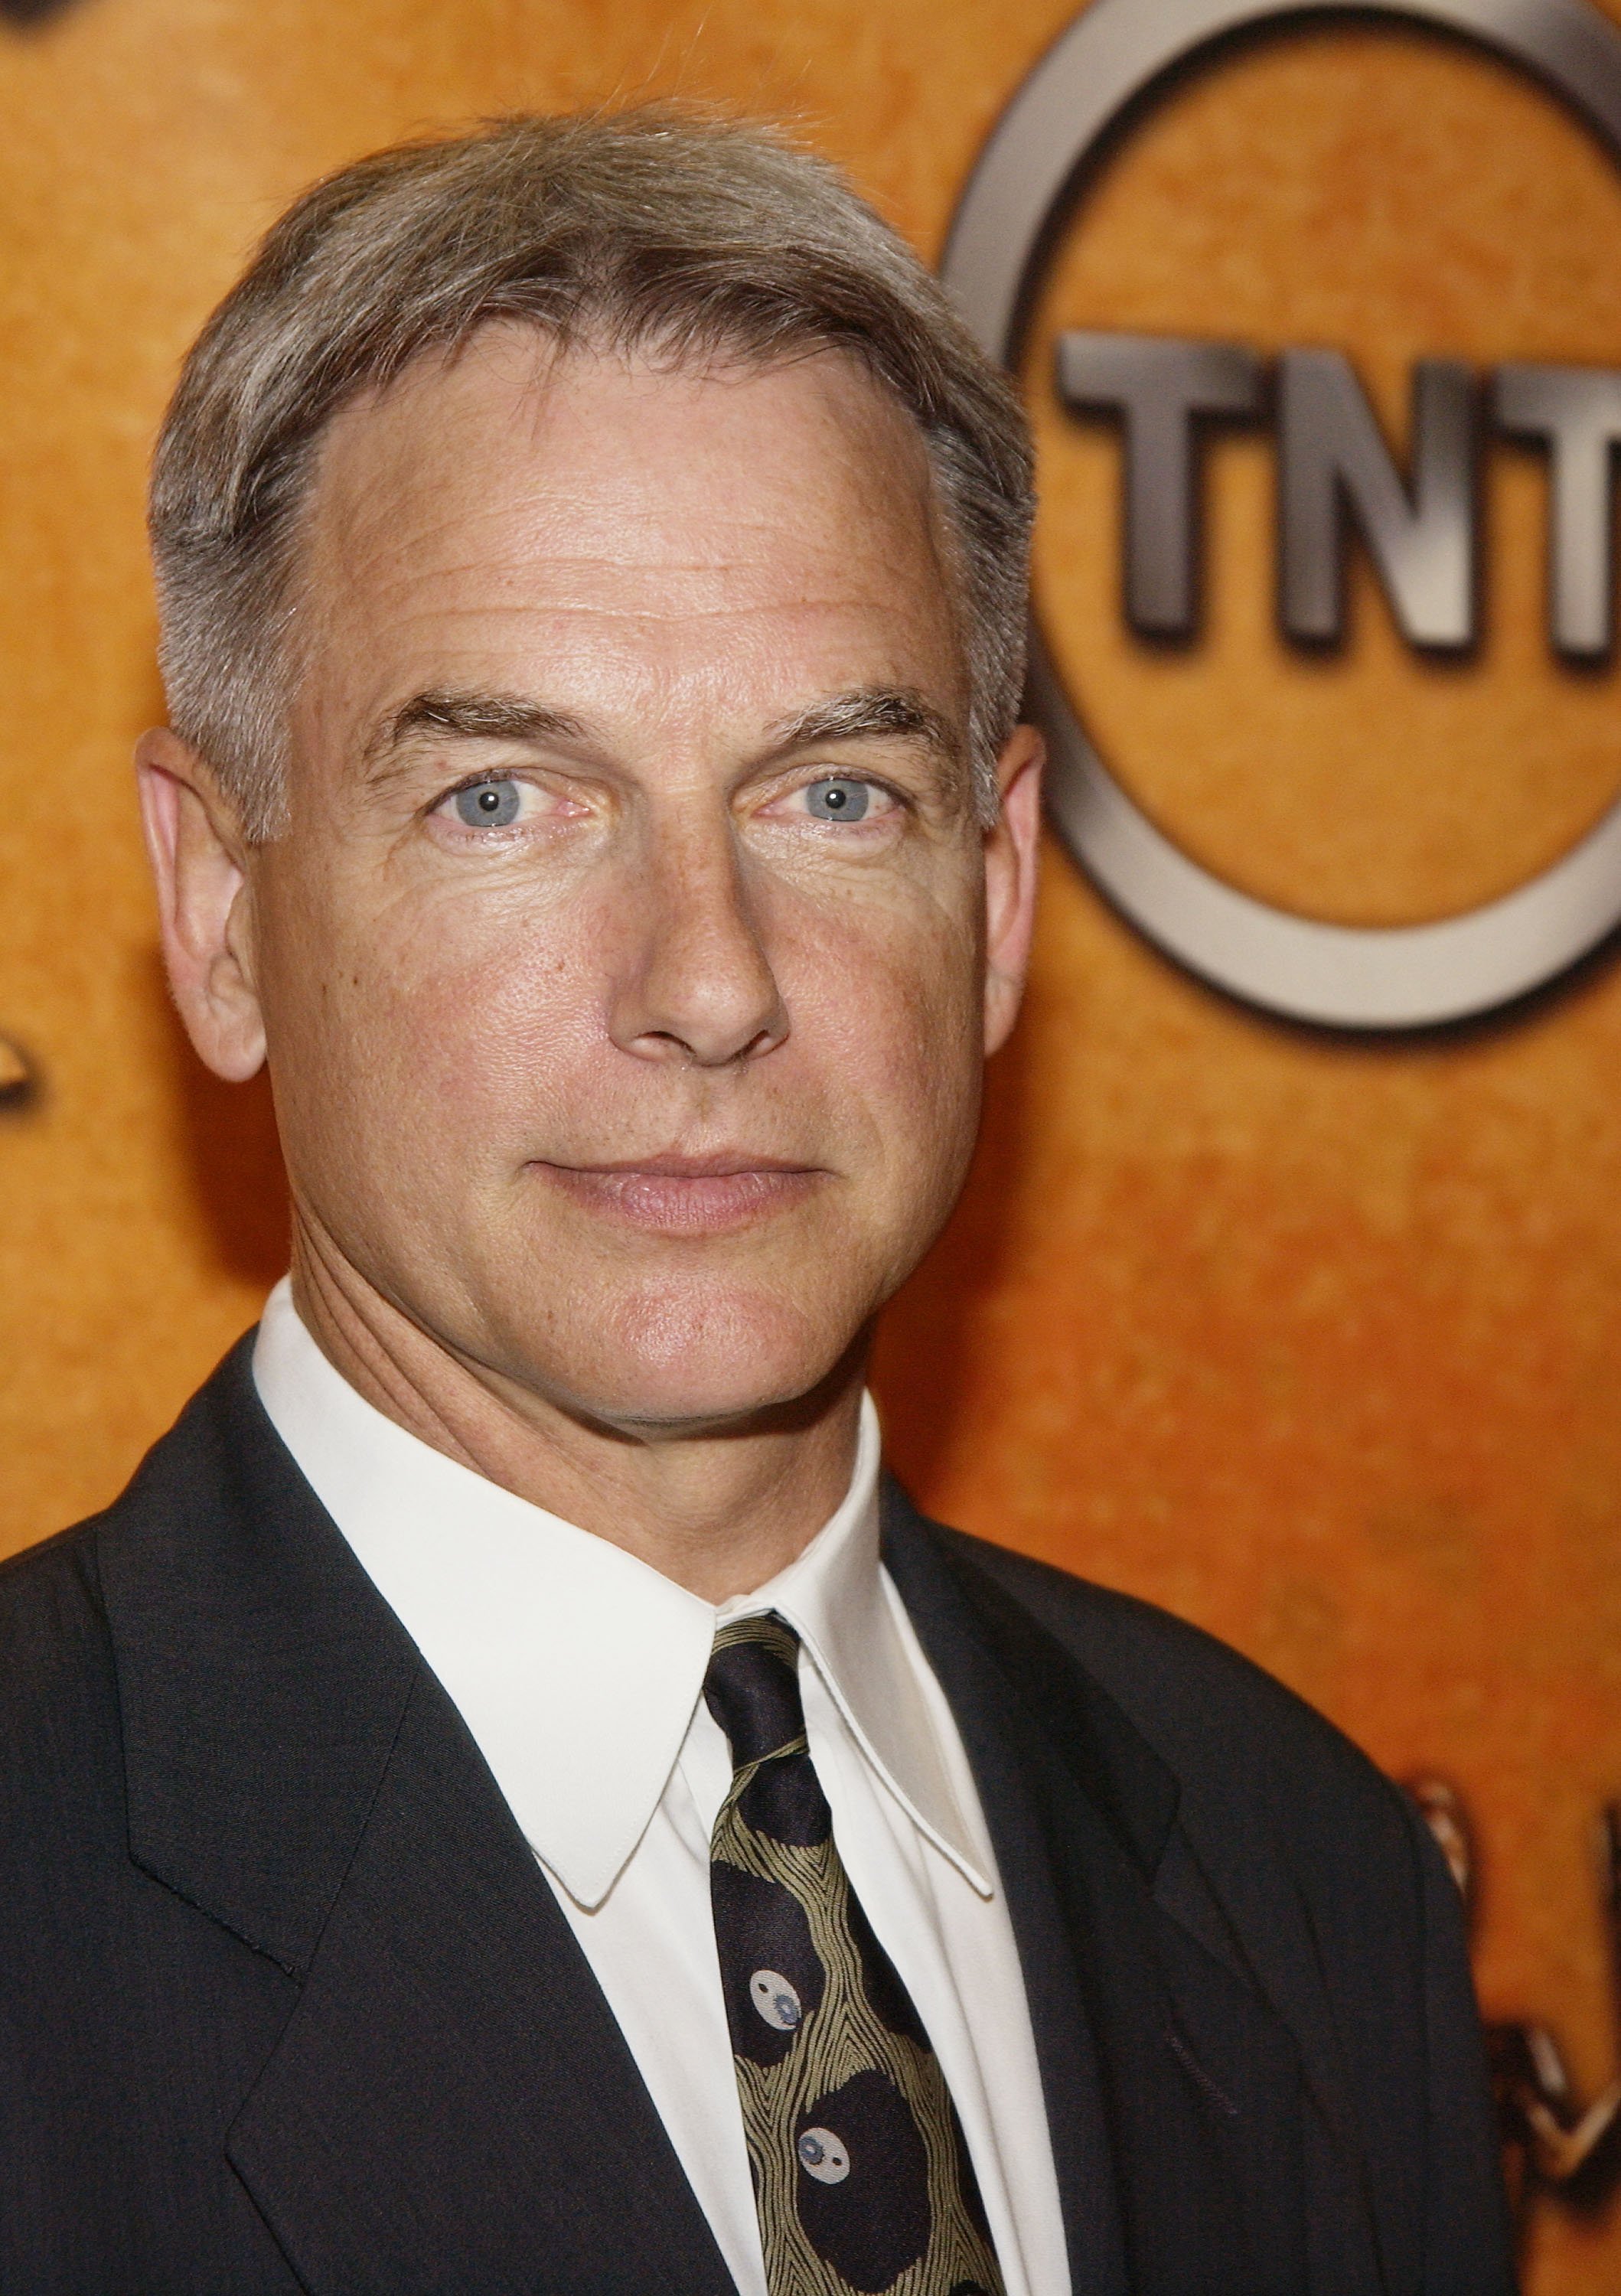 Mark Harmon, 10th Annual Screen Actors Guild Awards Nominations in Hollywood, Kalifornien am 15. Januar, 2004 | Quelle: Getty Images